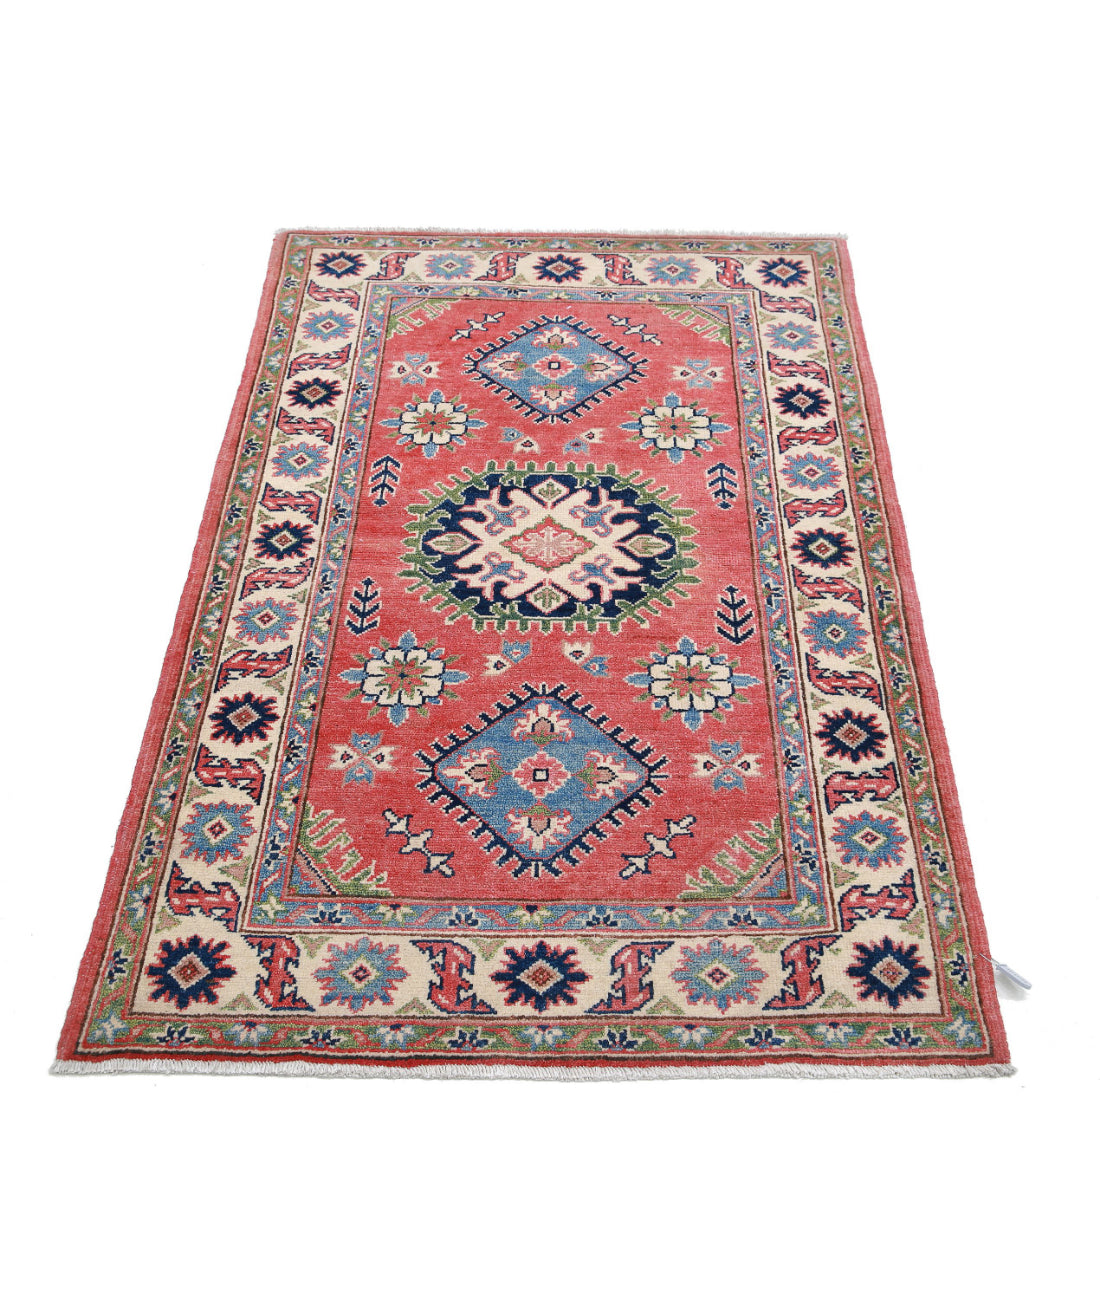 Hand Knotted Tribal Kazak Wool Rug - 3'1'' x 4'9'' 3'1'' x 4'9'' (93 X 143) / Red / Ivory